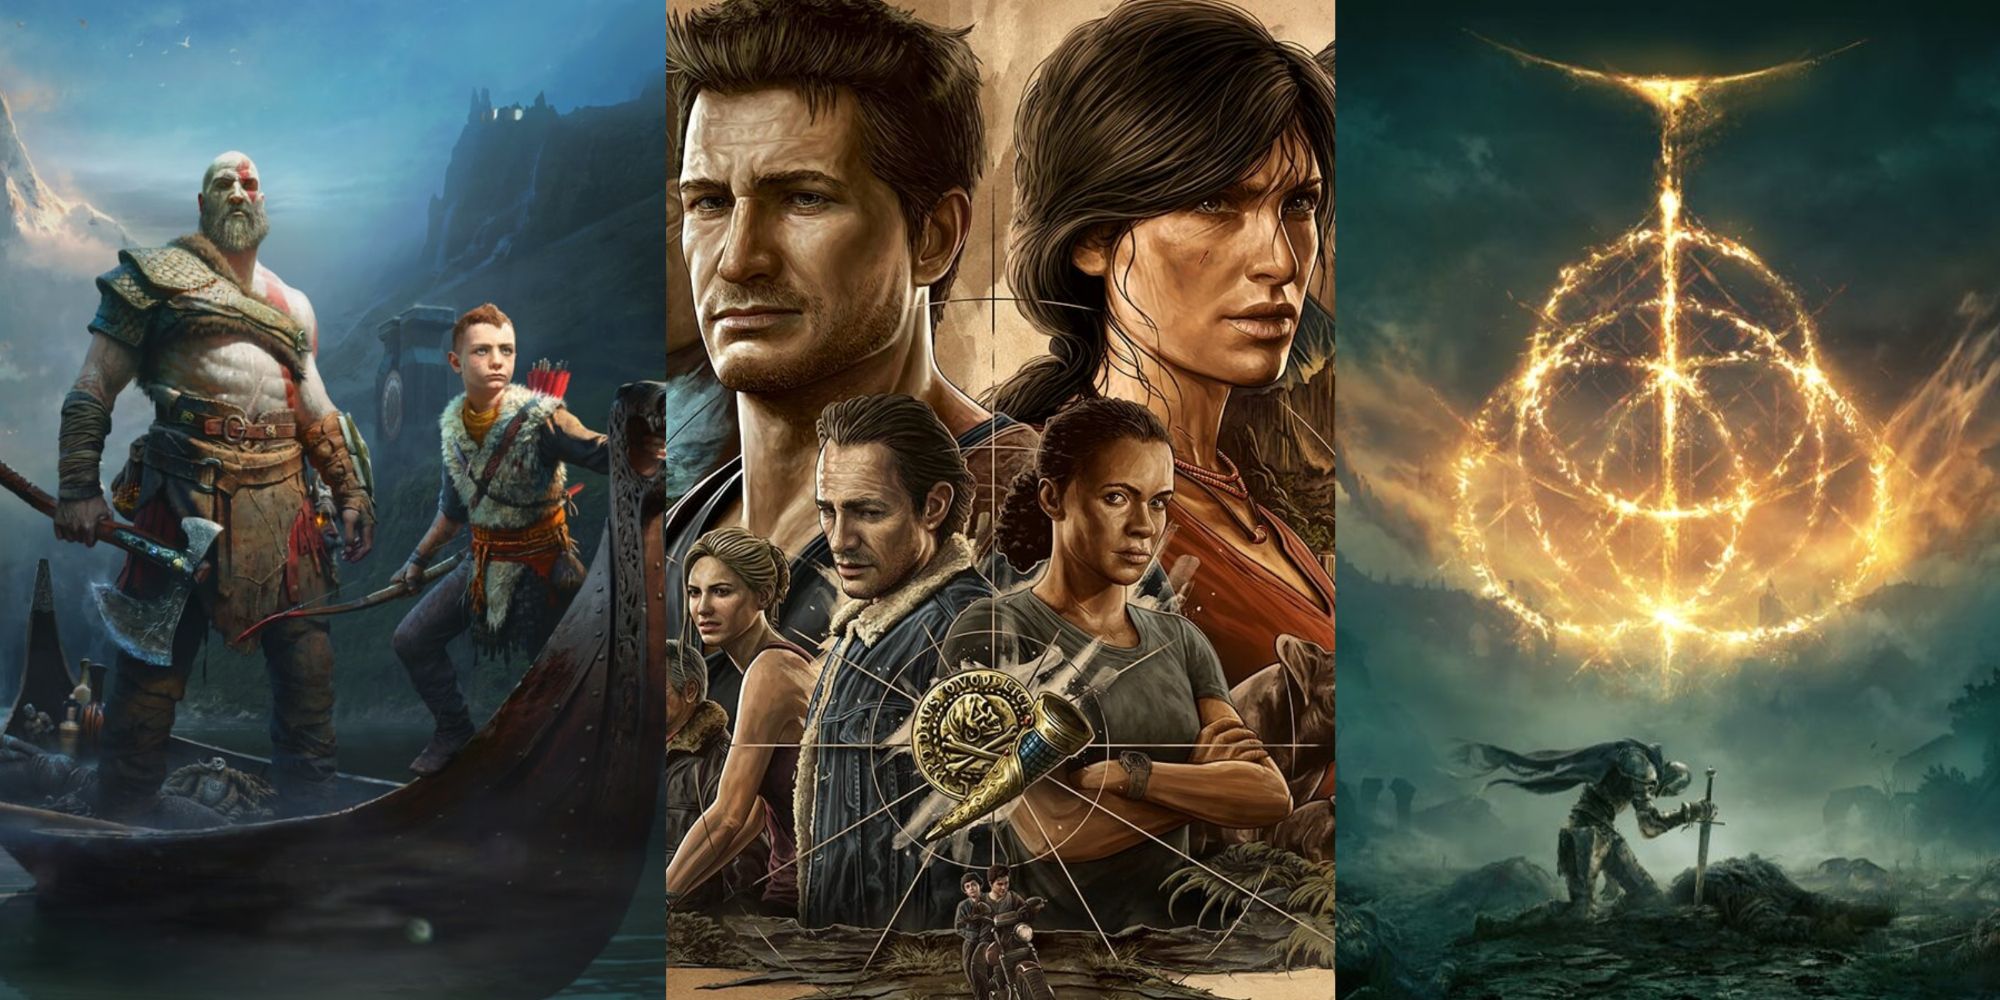 Collage of the Best Action Games On The Steam Deck, featuring God of War, Uncharted: Legacy of Thieves Collection, and Elden Ring